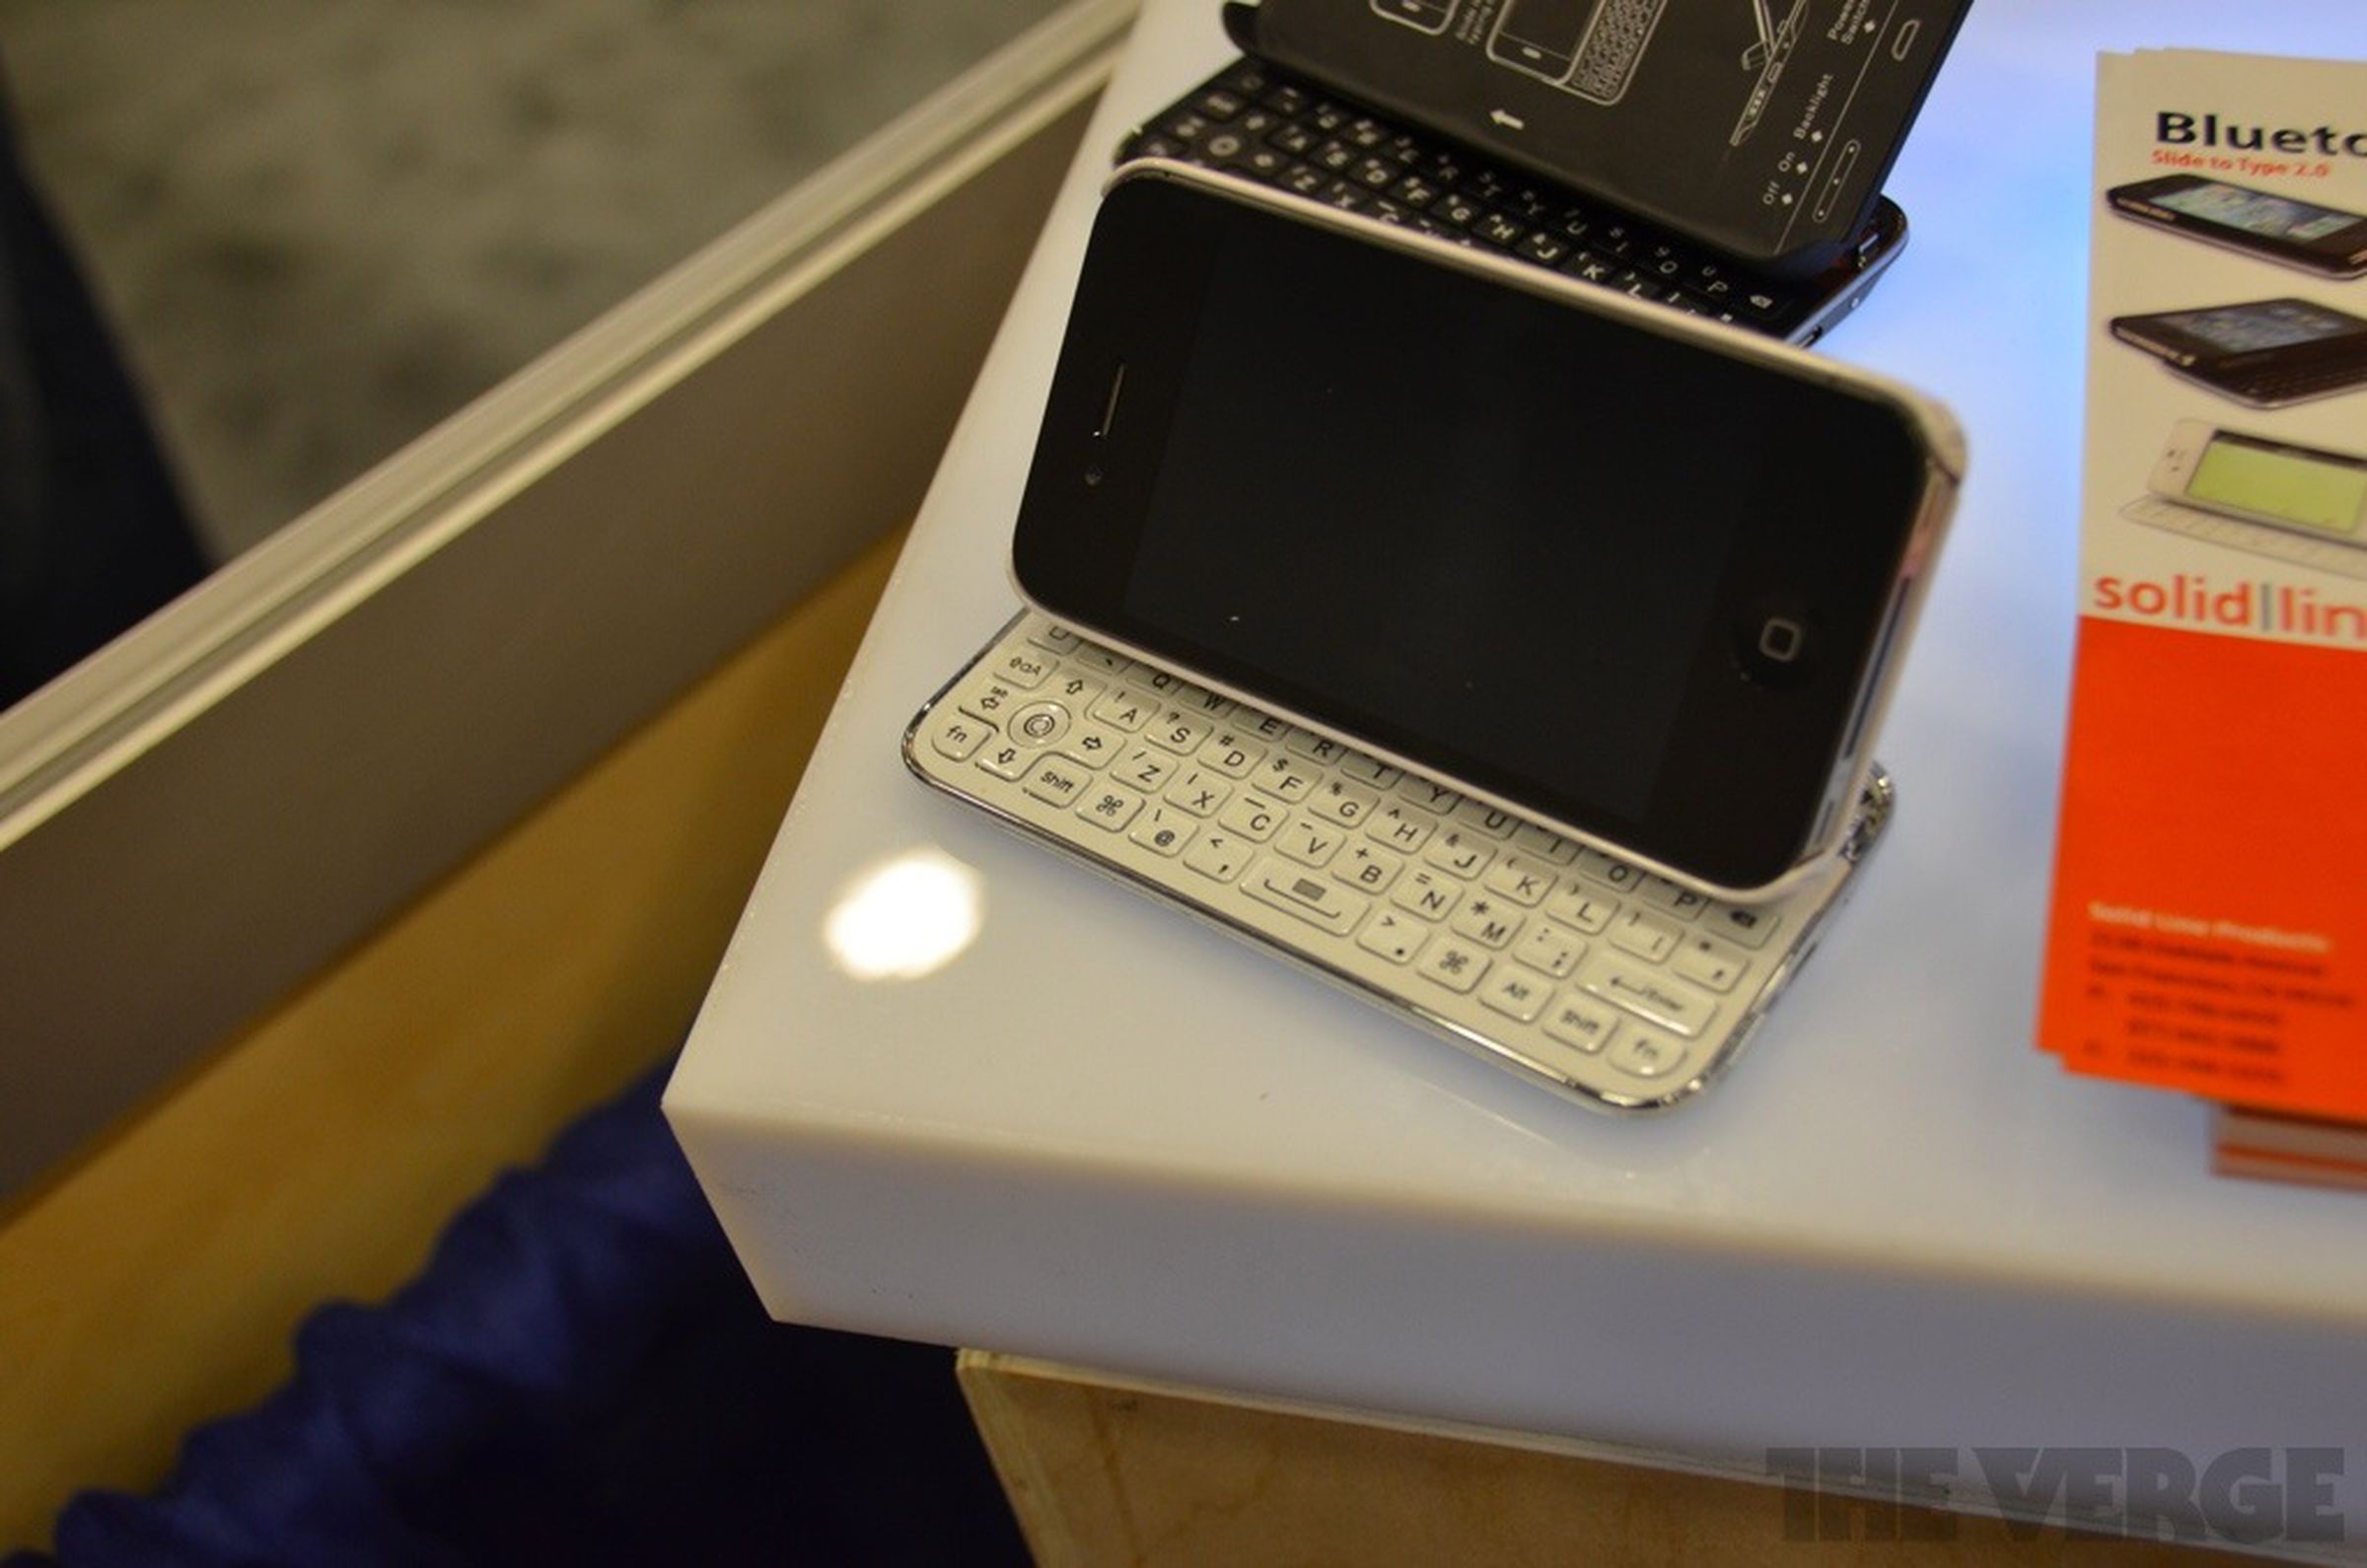 Macworld 2012 in pictures